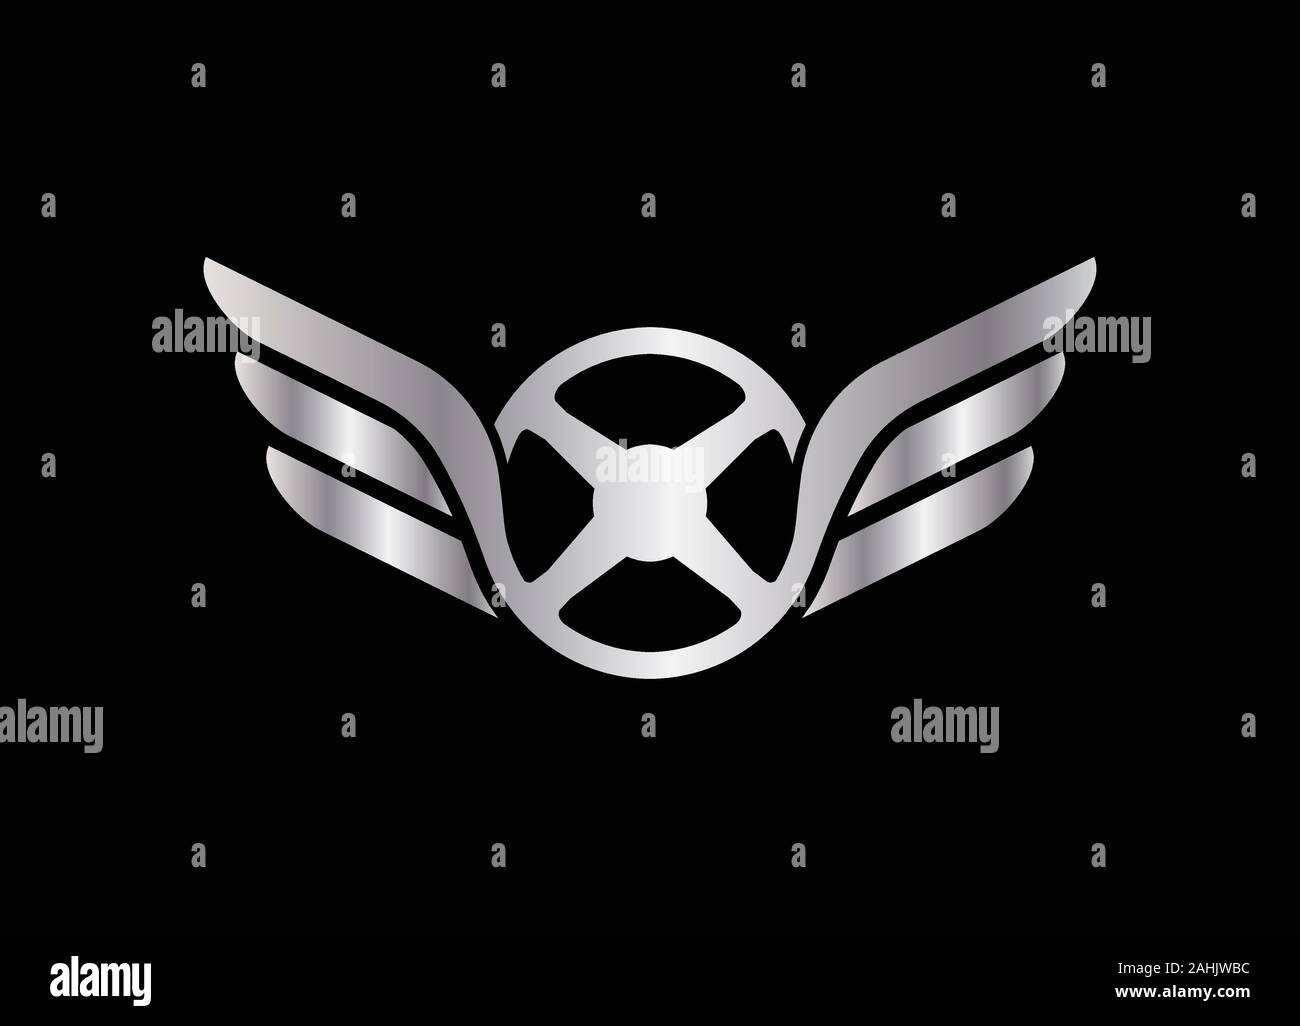 Steering with wings. Car steering logo design incorporated with wings illustration, Silver steering wheel wings logo Stock Vector